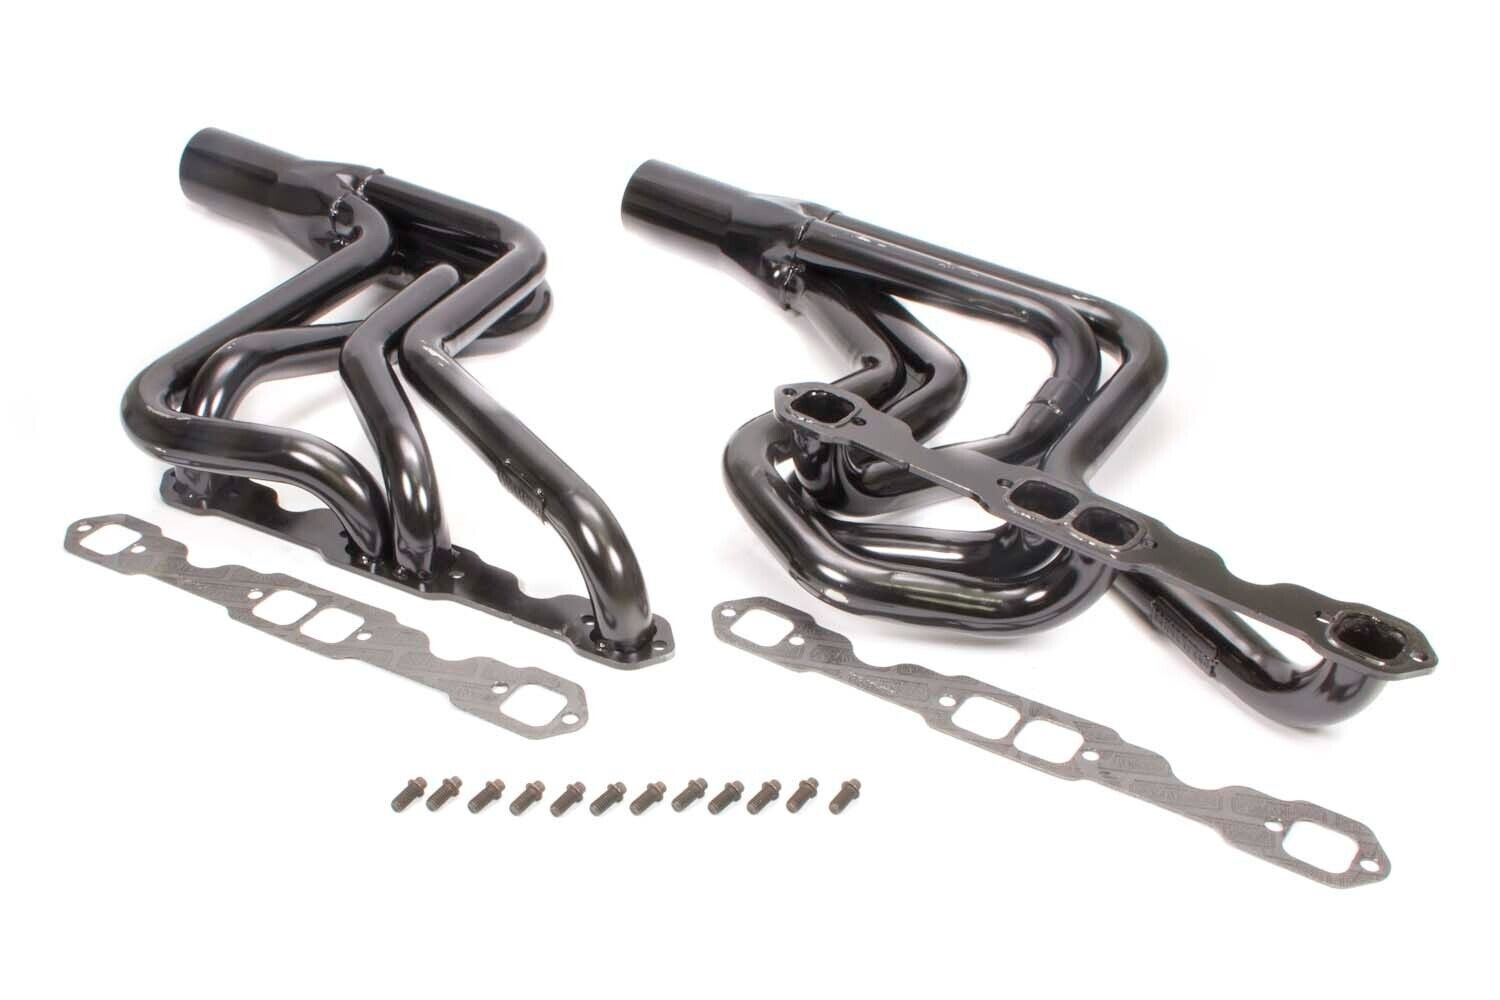 Schoenfeld 186 Street Stock Headers 1.75 for GM Small Block Chevy A F G Body